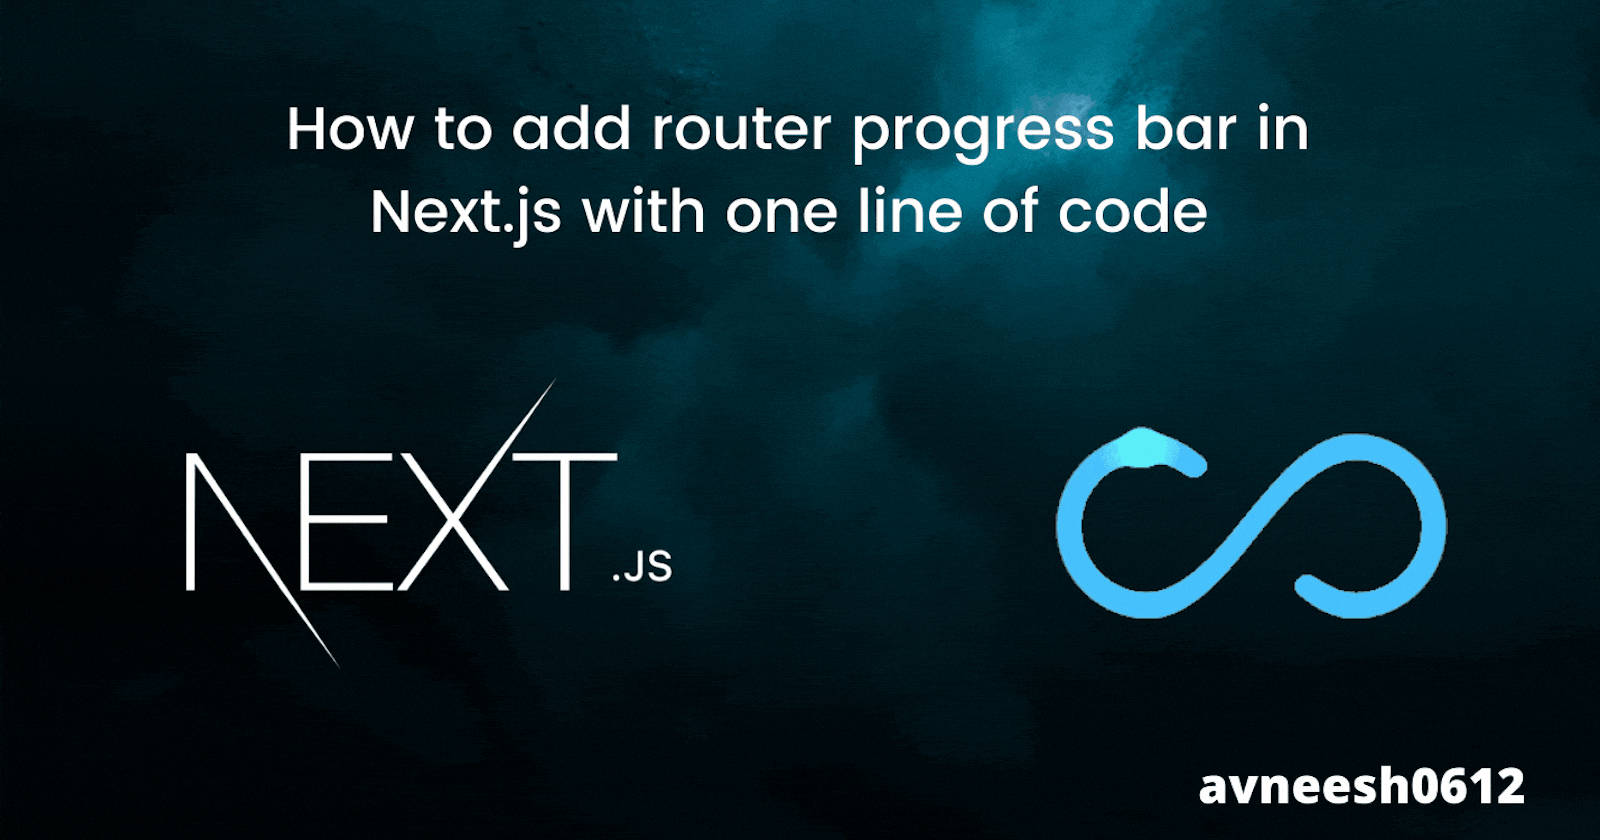 How to add router progress bar in Next.js with one line of code 🤯